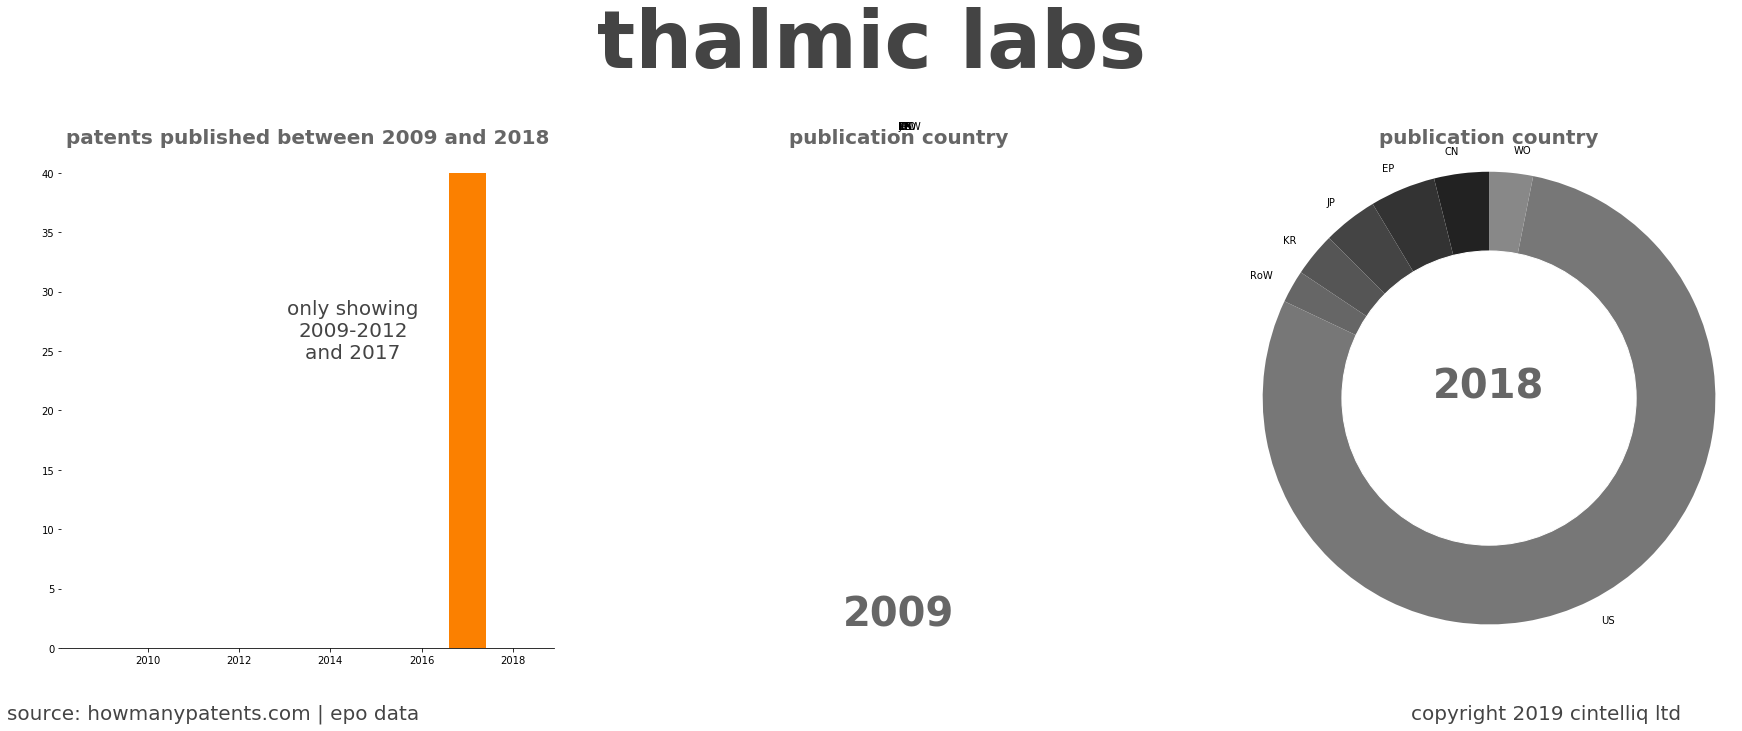 summary of patents for Thalmic Labs